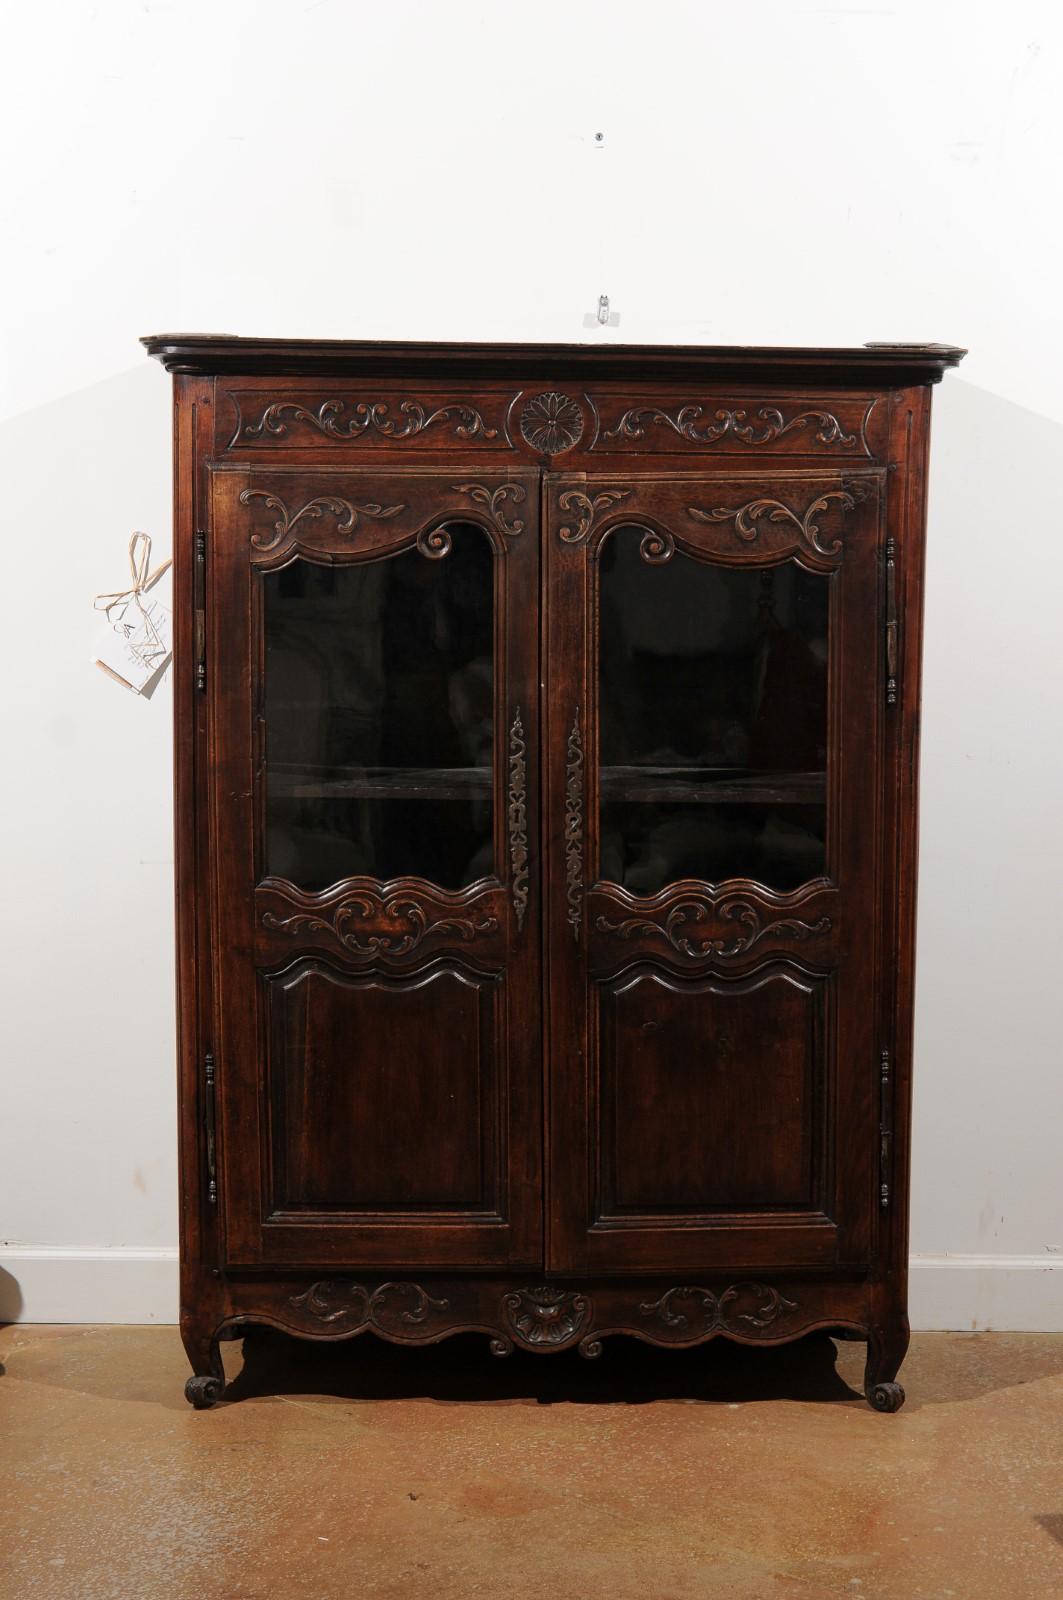 A petite French Louis XV style walnut vitrine from the late 19th century, with carved motifs and glass doors. Created in France during the last quarter of the 19th century, this walnut vitrine features a molded cornice sitting above two doors